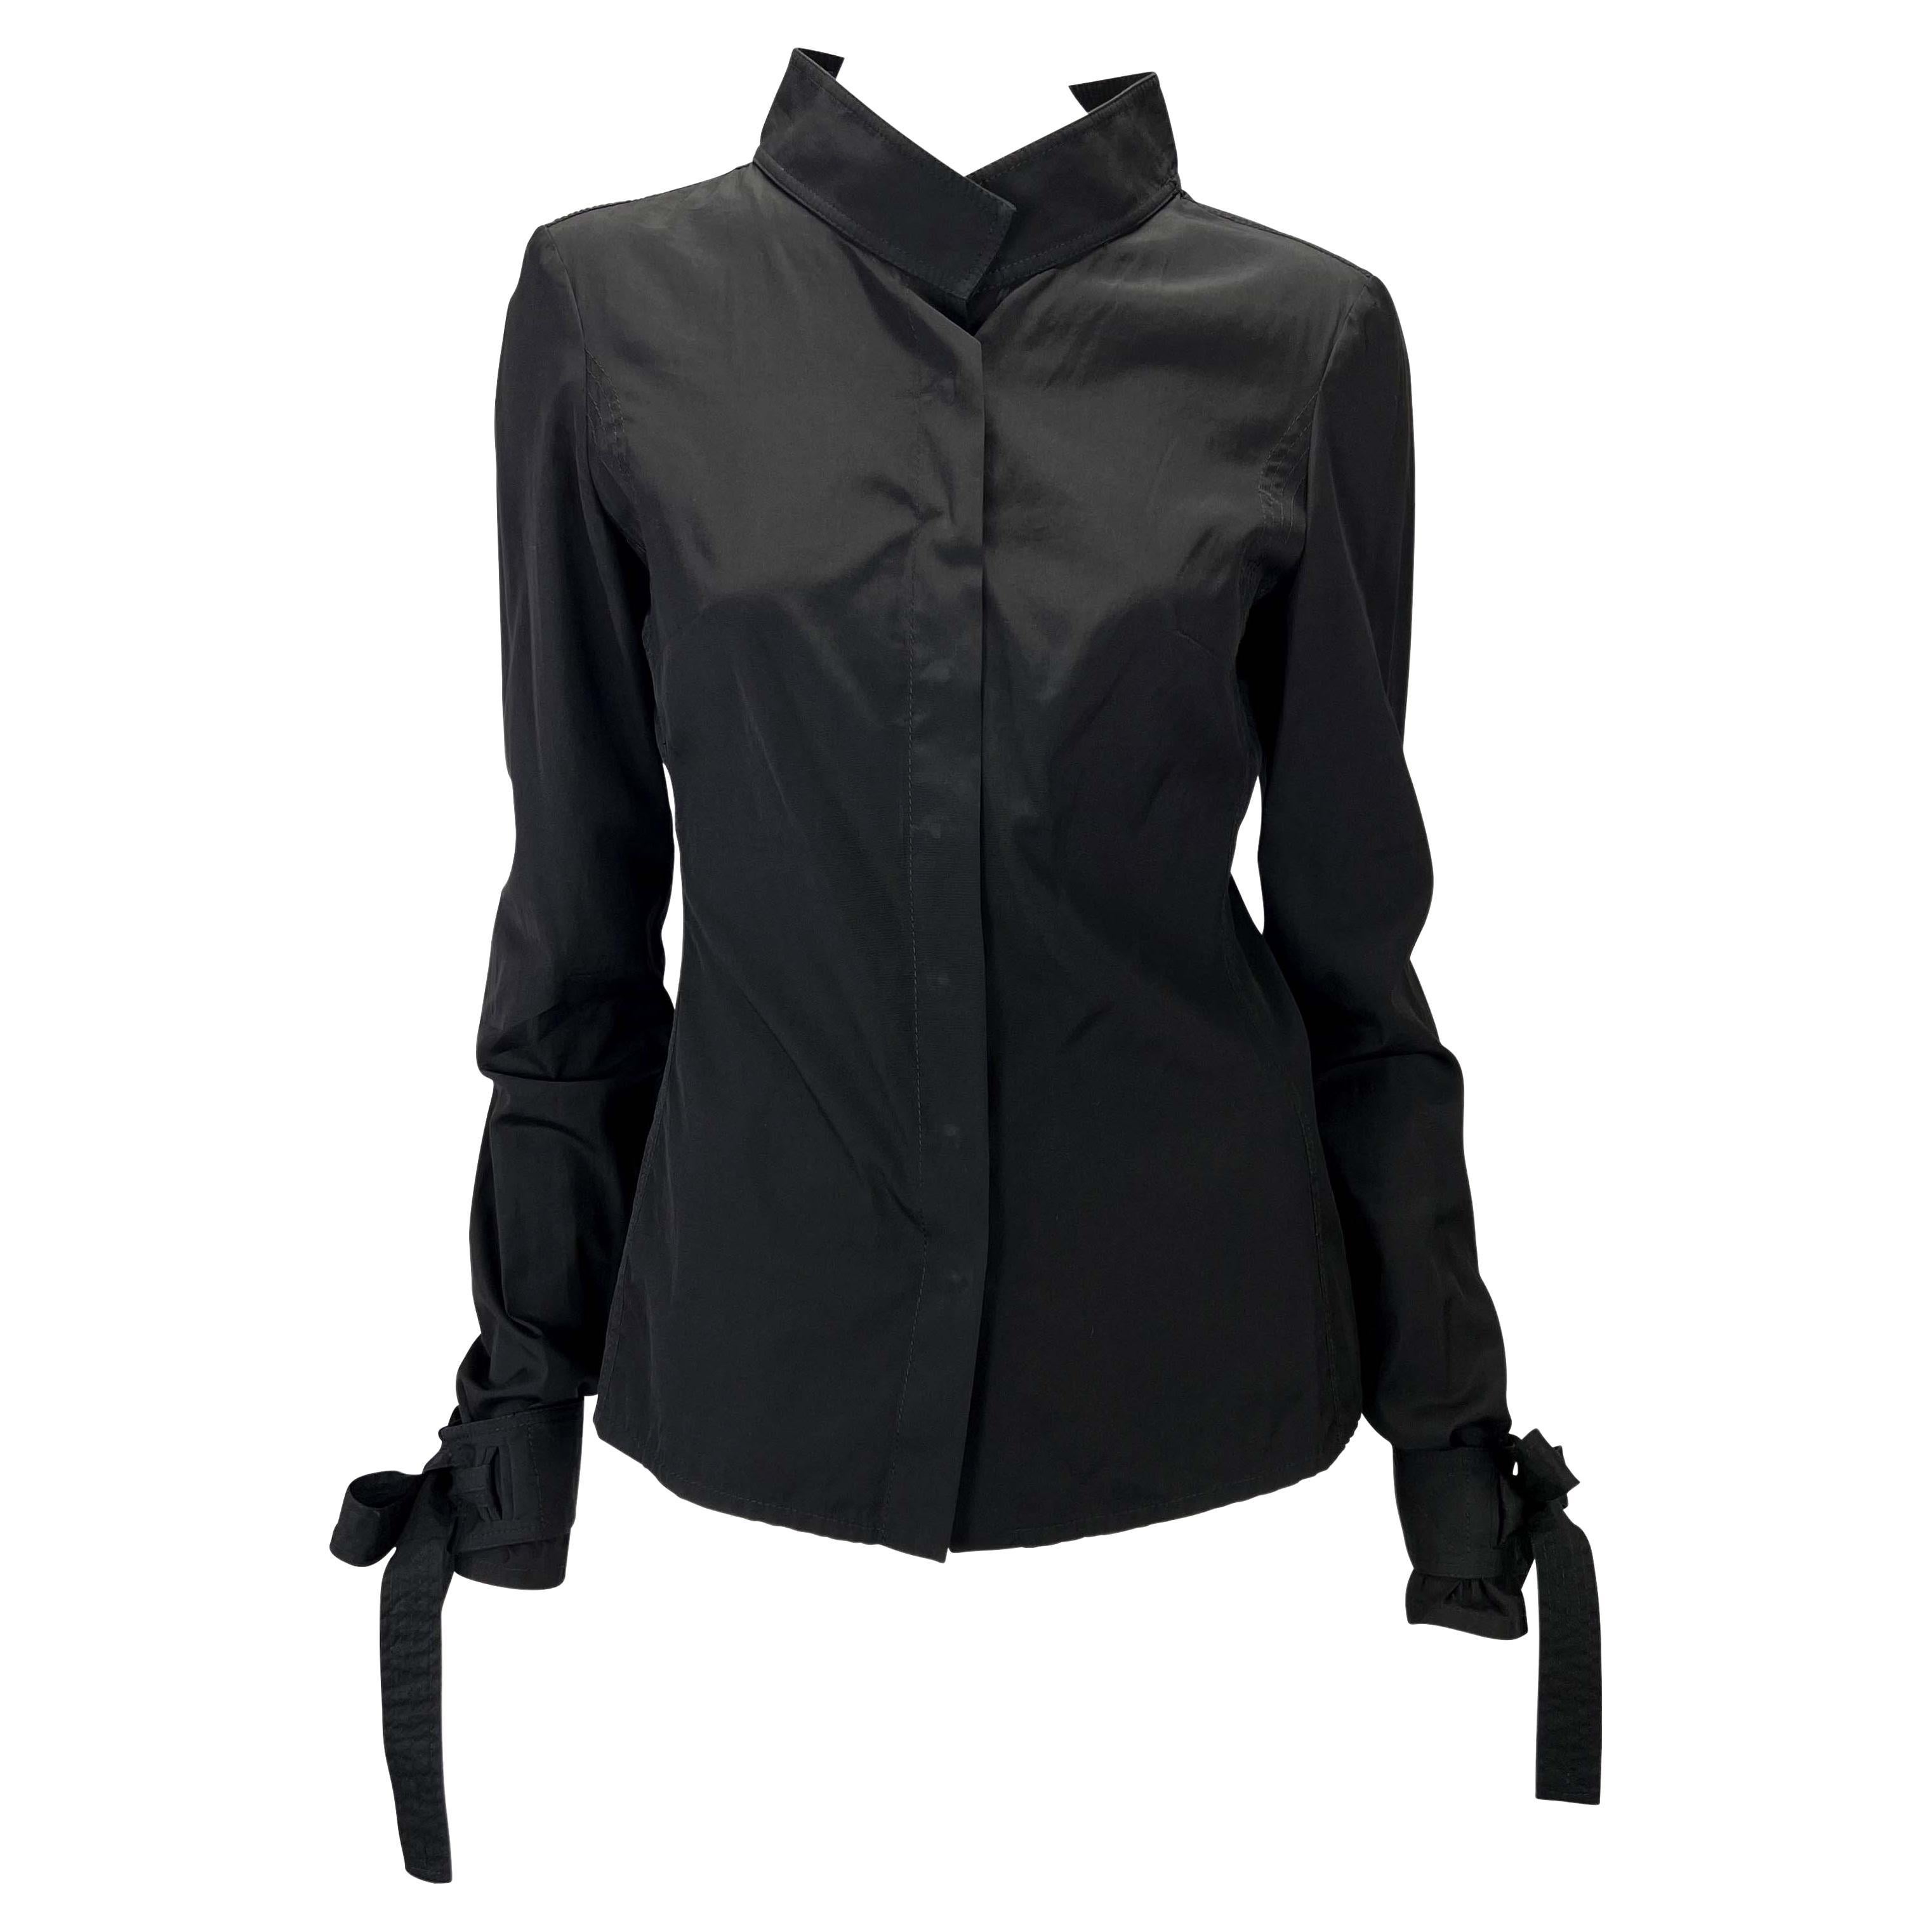 Presenting a black long sleeve Gucci shirt, designed by Tom Ford. From the Fall/Winter 2003 collection, this top features a stand-up collar, quilting near the underarm, and ties at the cuffs. Covered snap buttons grace the front of the shirt adding